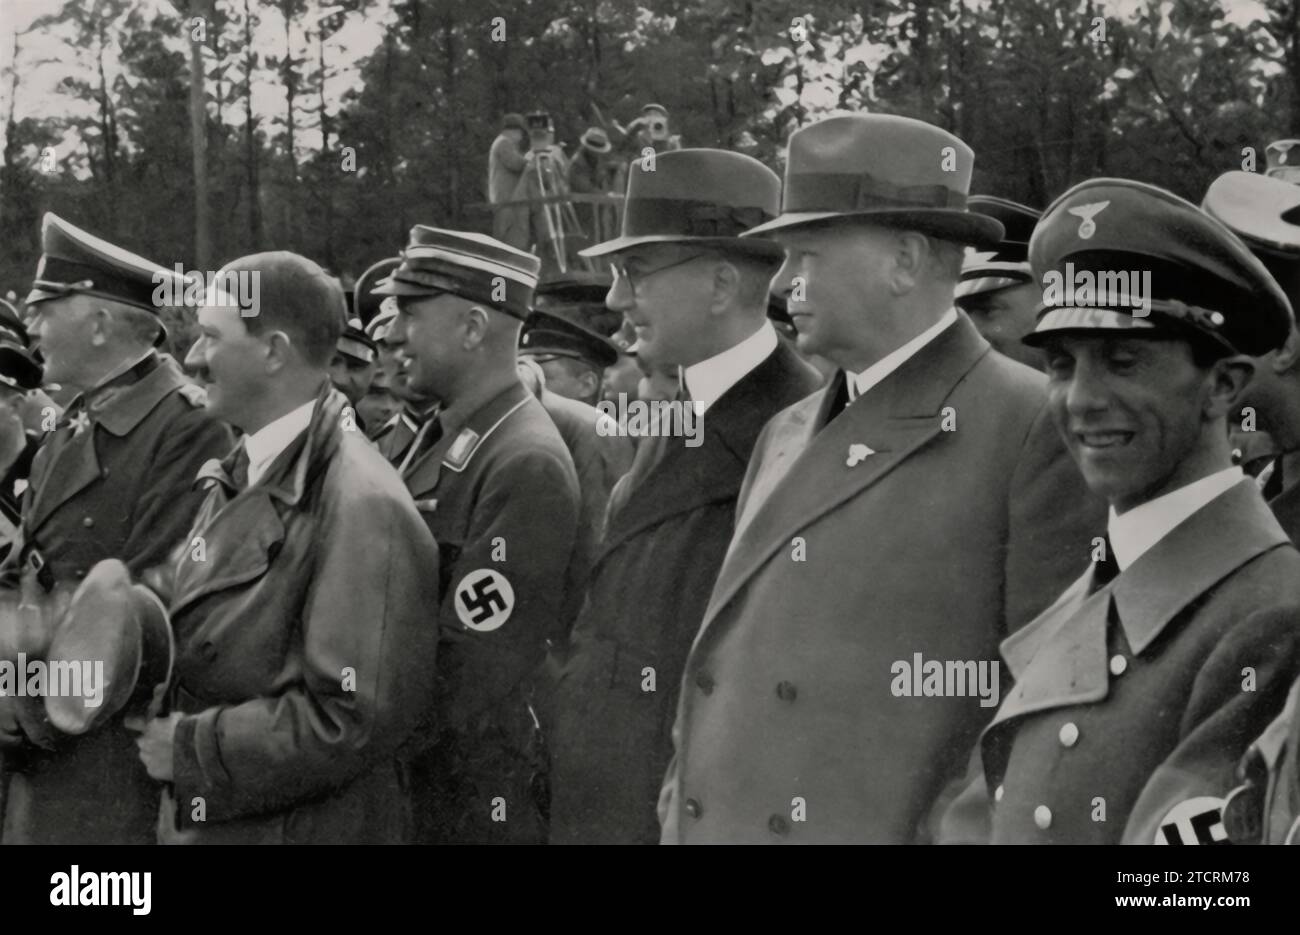 At the 1935 inauguration of the Reichsautobahn section between Frankfurt and Darmstadt, key figures gather, illustrating the Nazi leadership's emphasis on infrastructure. From left to right, Reich War Minister von Blomberg, Adolf Hitler, General Inspector Dr. Todt, Reichsbank President Dr. Schacht, Reichsbahn Director Dr. Dorpmüller, and Reich Minister Dr. Goebbels are present. This assembly of high-ranking officials underscores the regime's investment in the autobahn project, a symbol of technological advancement and national progress. Stock Photo